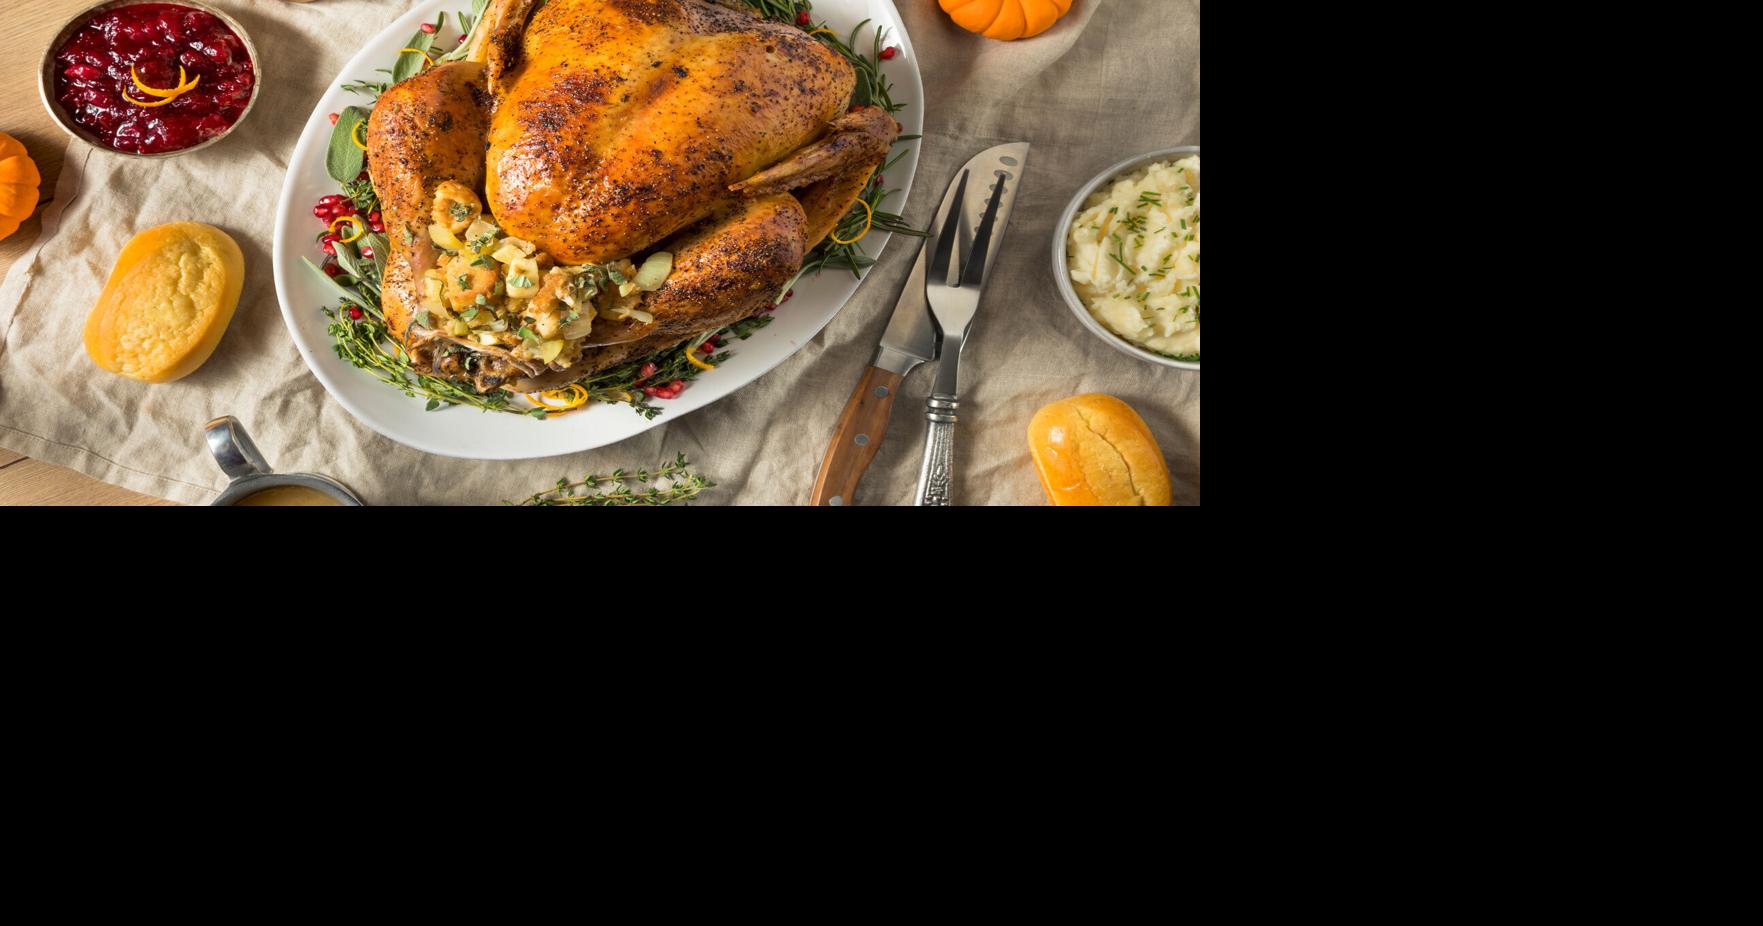 Thanksgiving Dinner: How to Prepare Your Turkey and Trimmings Safely